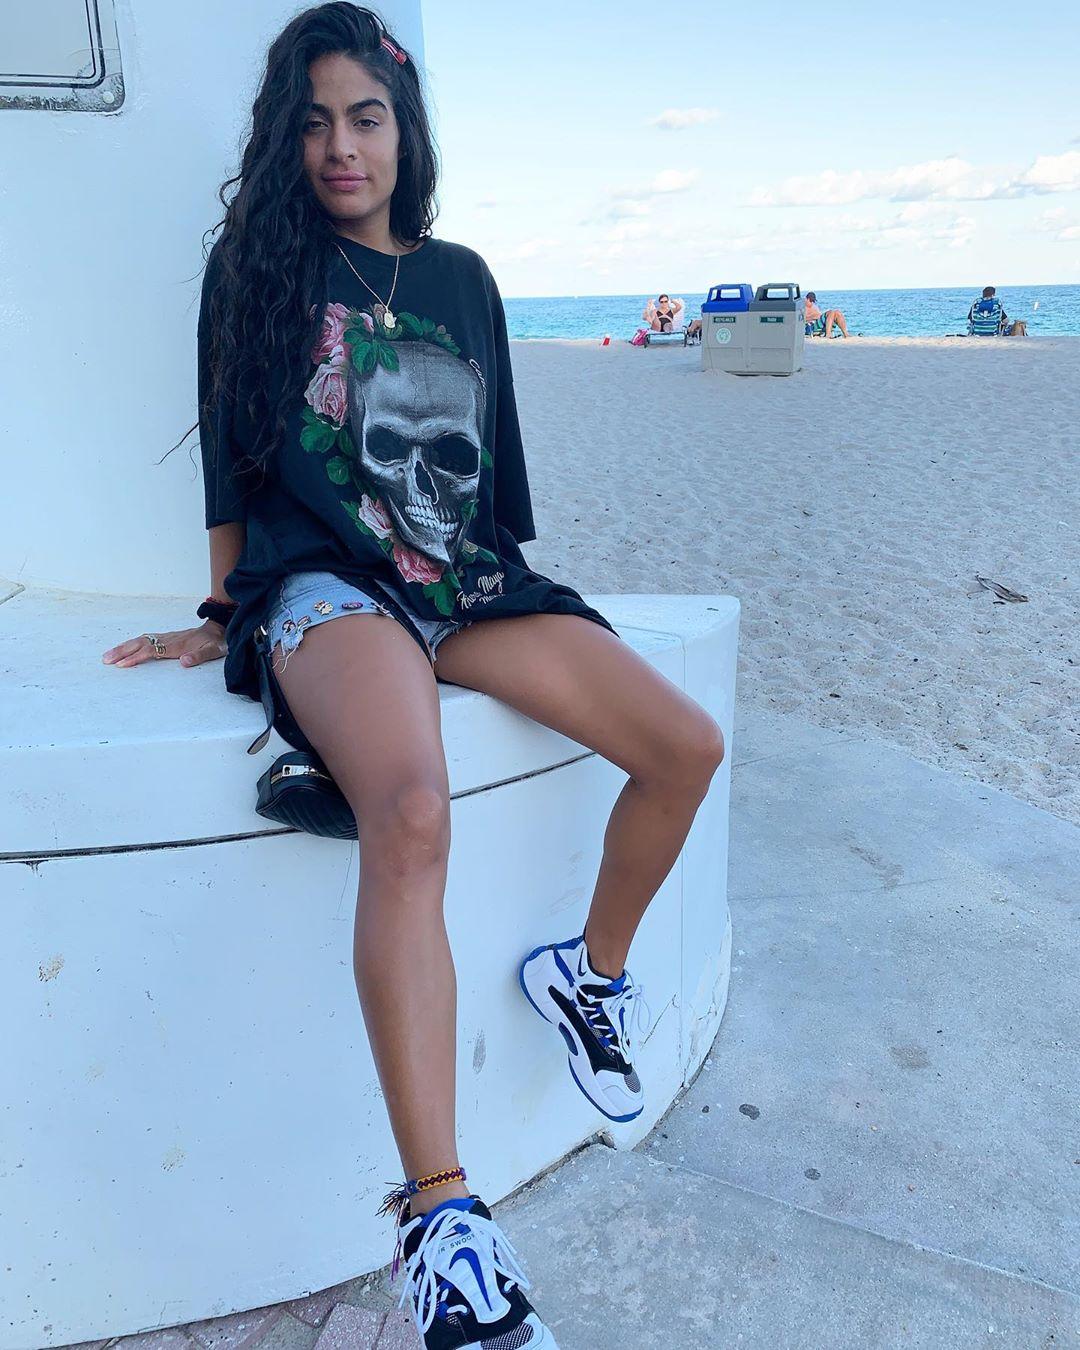 51 Hot Pictures Of Jessie Reyez Will Leave You Flabbergasted By Her Hot Magnificence 542